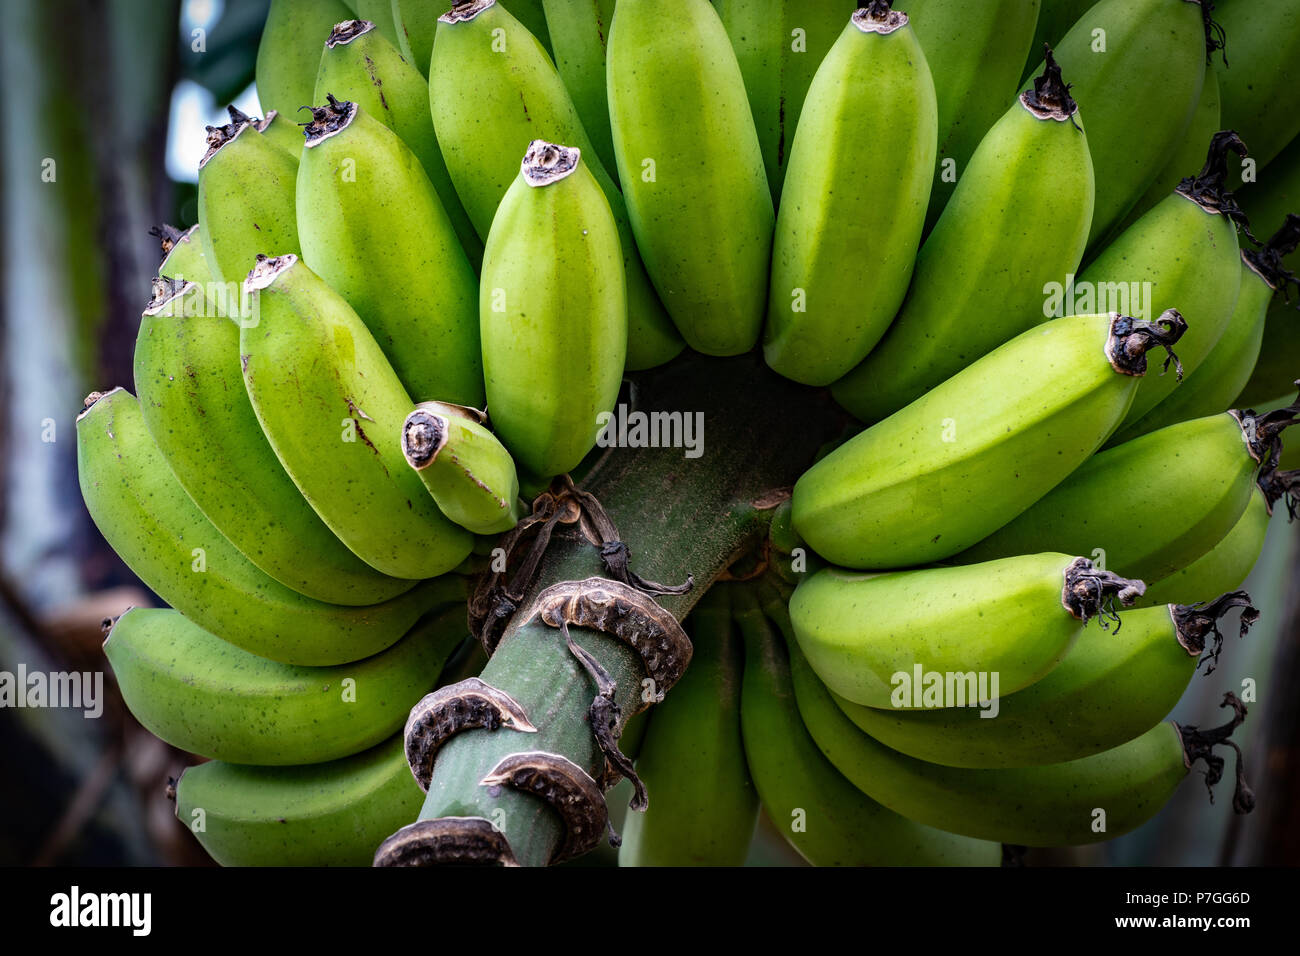 https://c8.alamy.com/comp/P7GG6D/bunches-of-green-bananas-hanging-from-tree-in-st-elizabeth-jamaica-P7GG6D.jpg